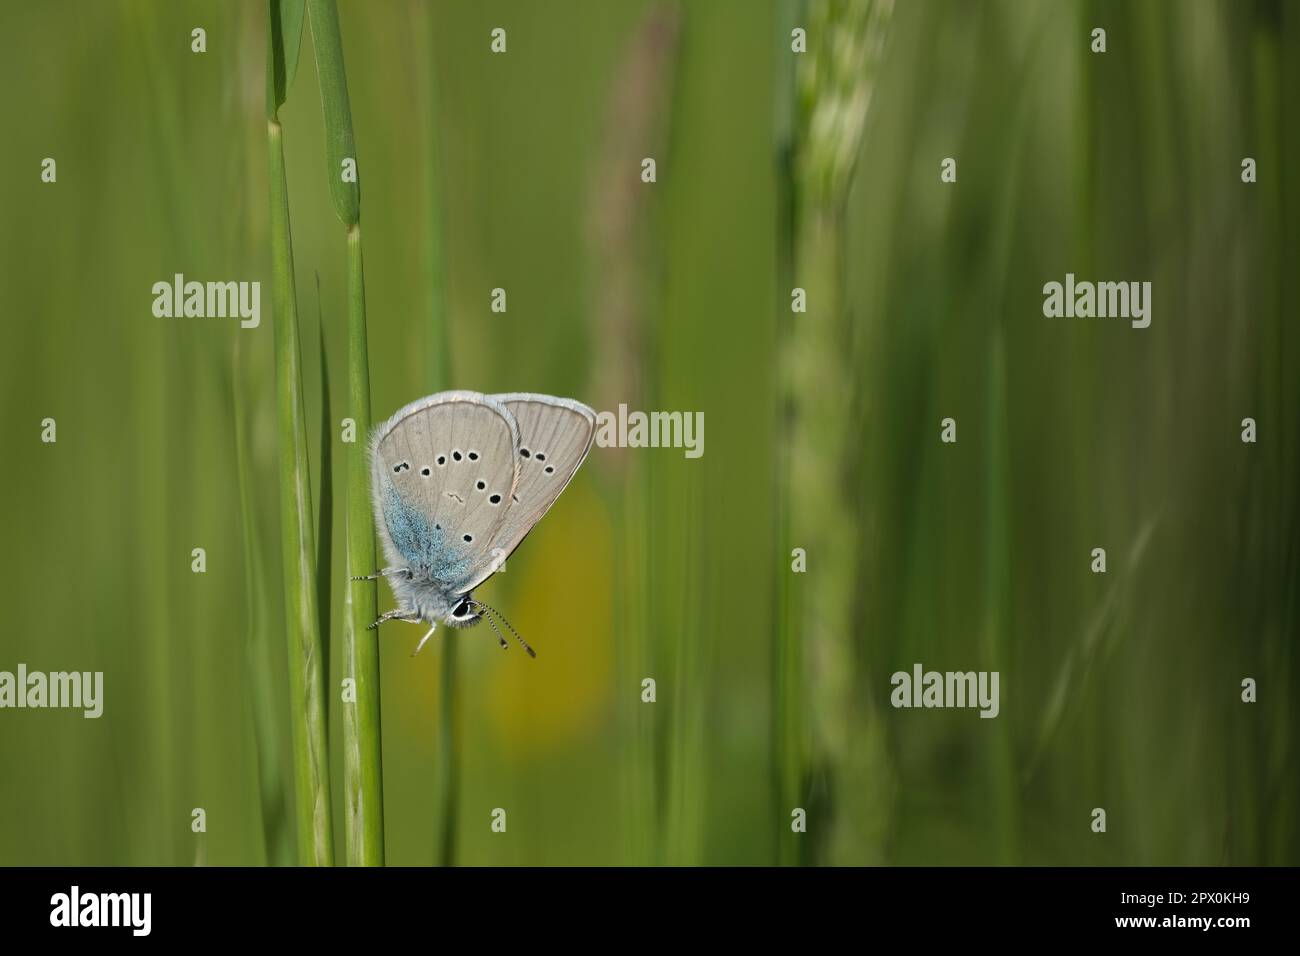 Tiny butterfly on a blade of grass, green background, horizontal image of a osiris blue butterfly Stock Photo